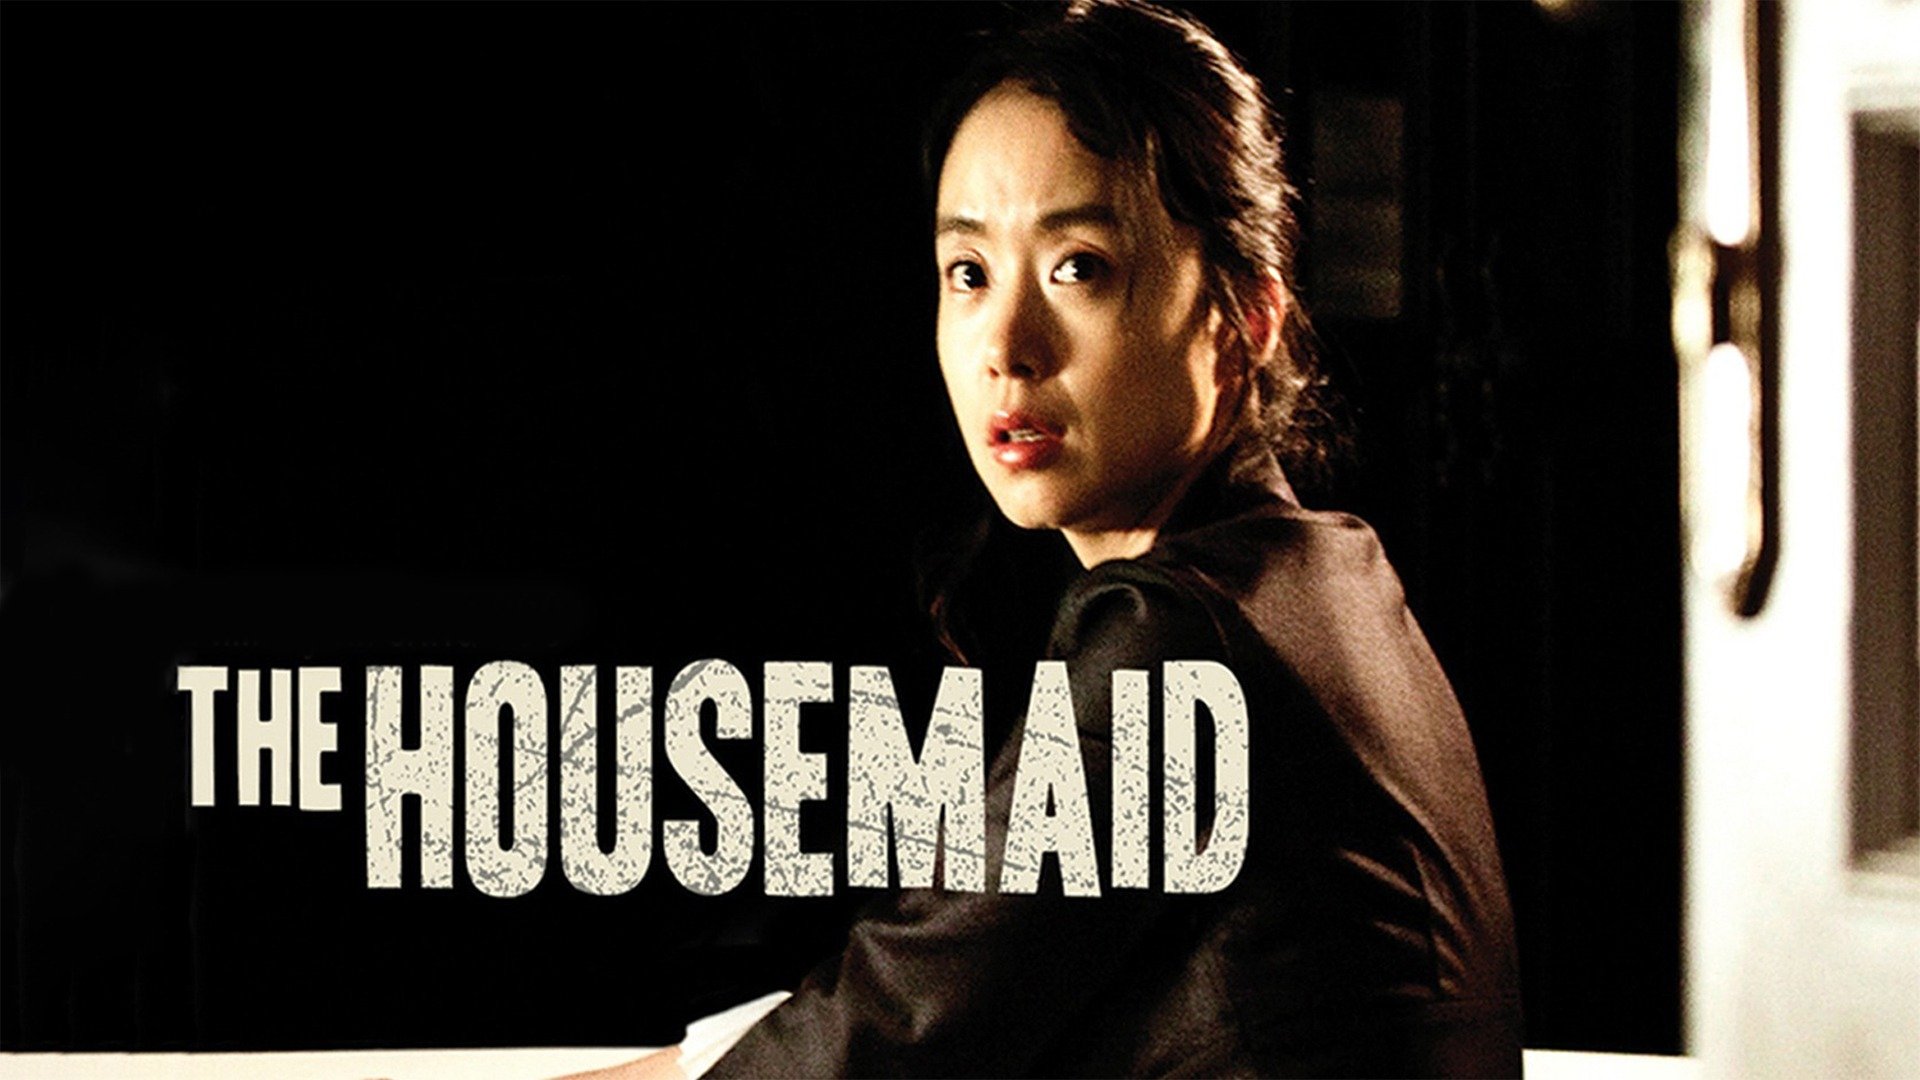 angela hartman recommends The Housemaid Movie Online